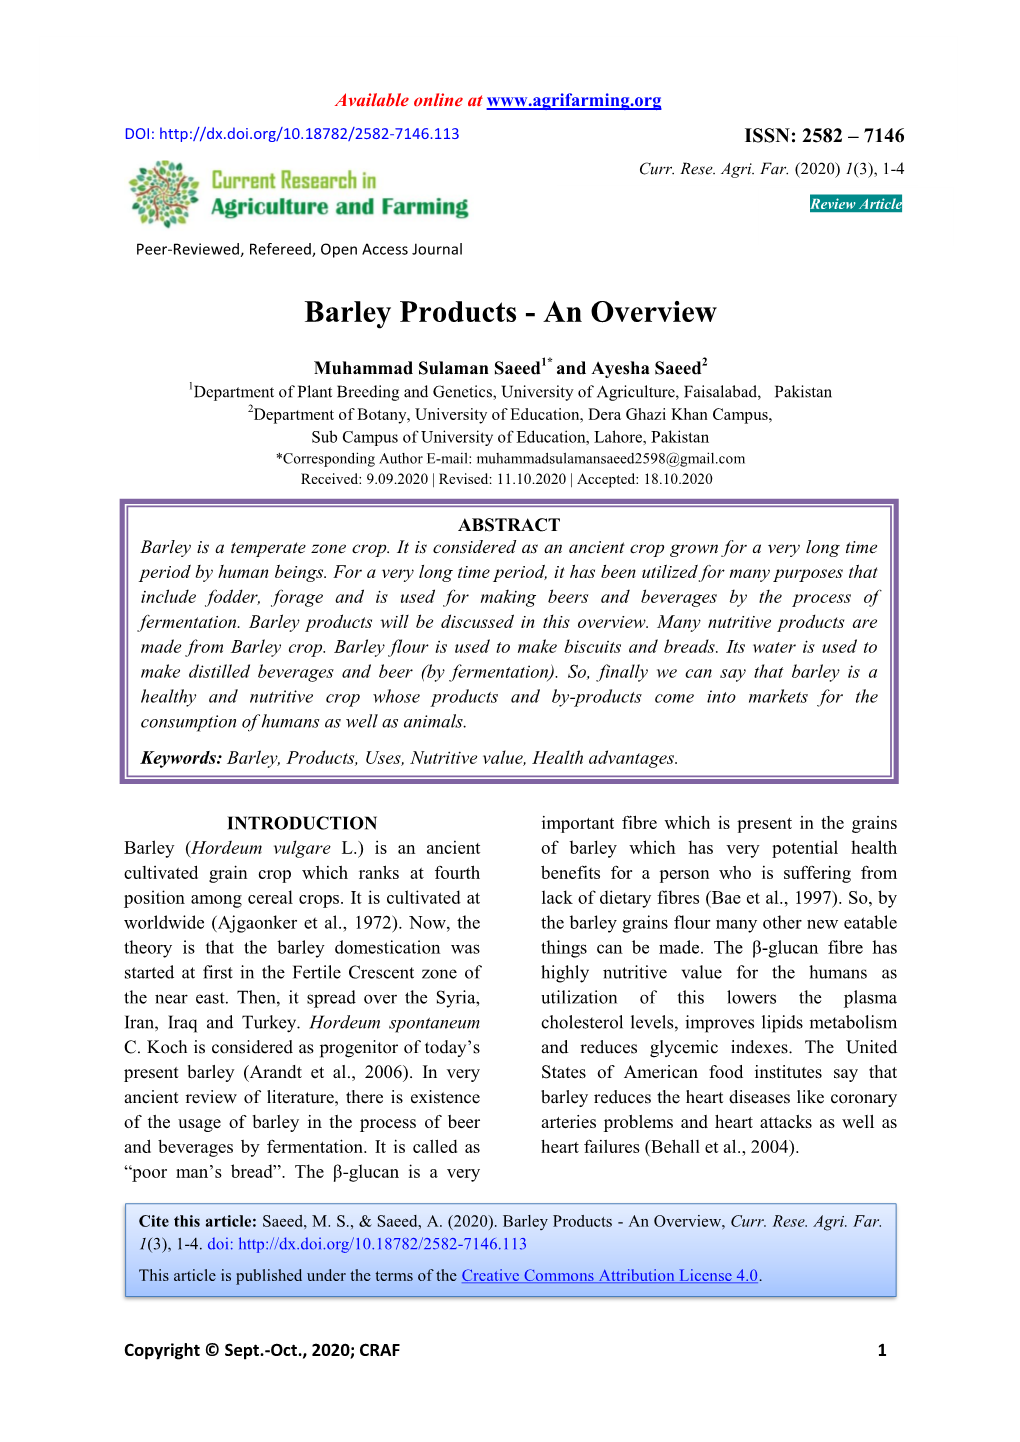 Barley Products - an Overview